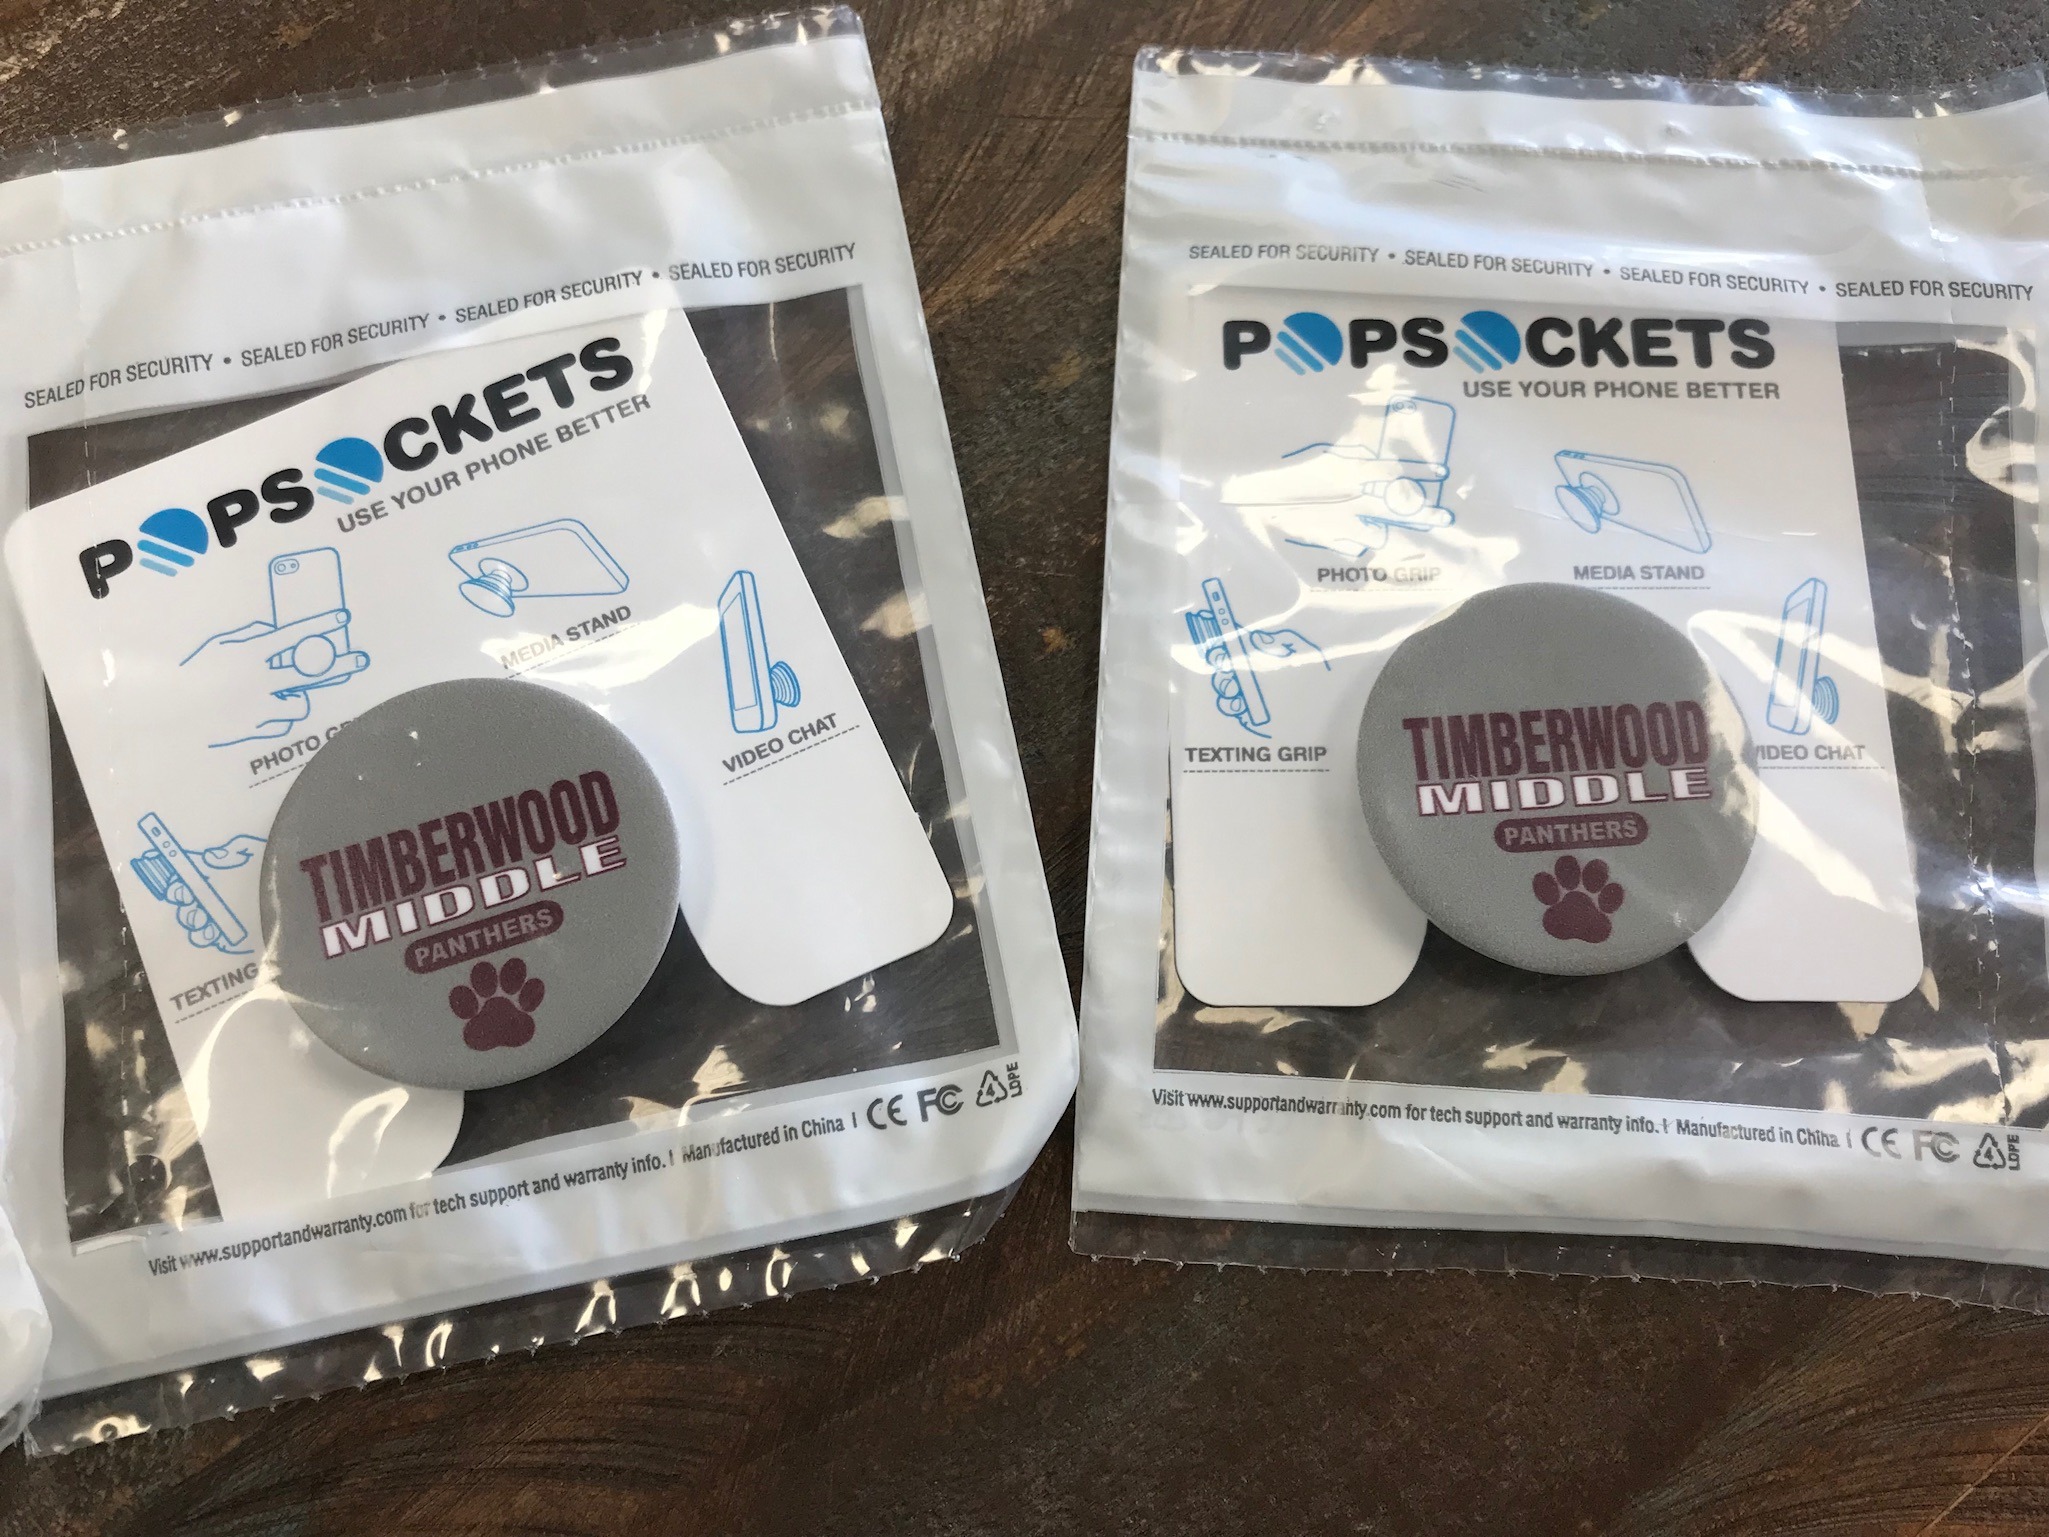 Popsockets with brand logos for marketing.